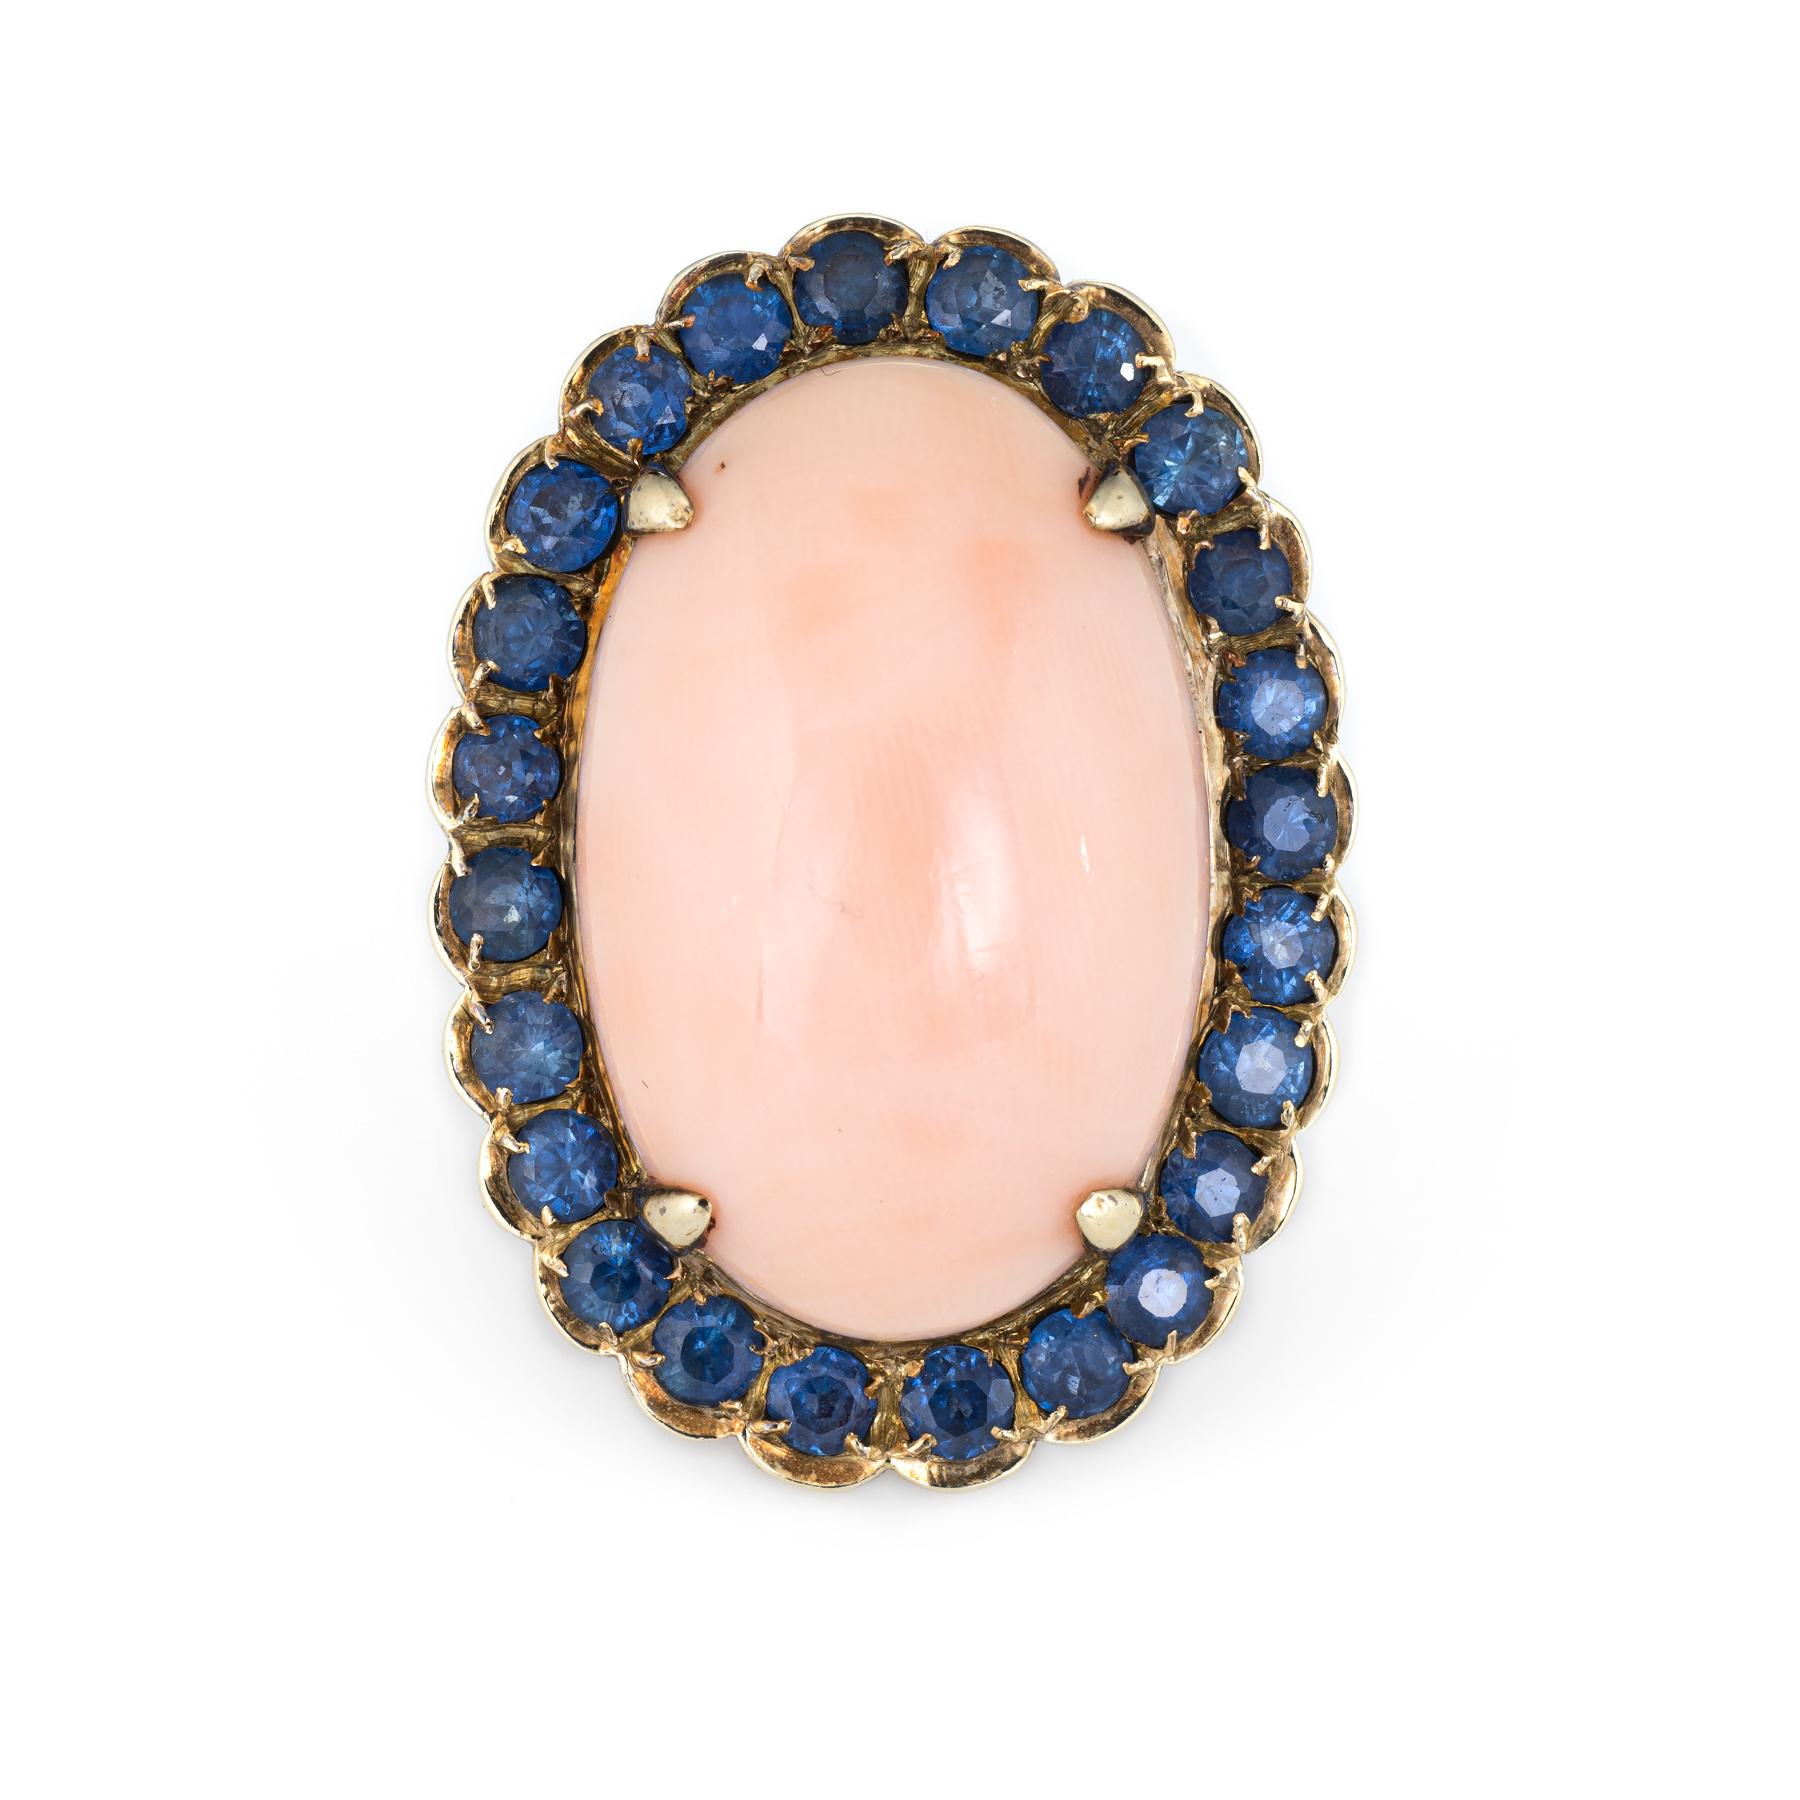 Finely detailed vintage angel skin coral & sapphire cocktail ring (circa1950s to 1960s), crafted in 14 karat yellow gold. 

Cabochon cut angel skin coral measures 21mm x 13.5mm (estimated at 20 carats), accented with 25 estimated 0.05 carat blue